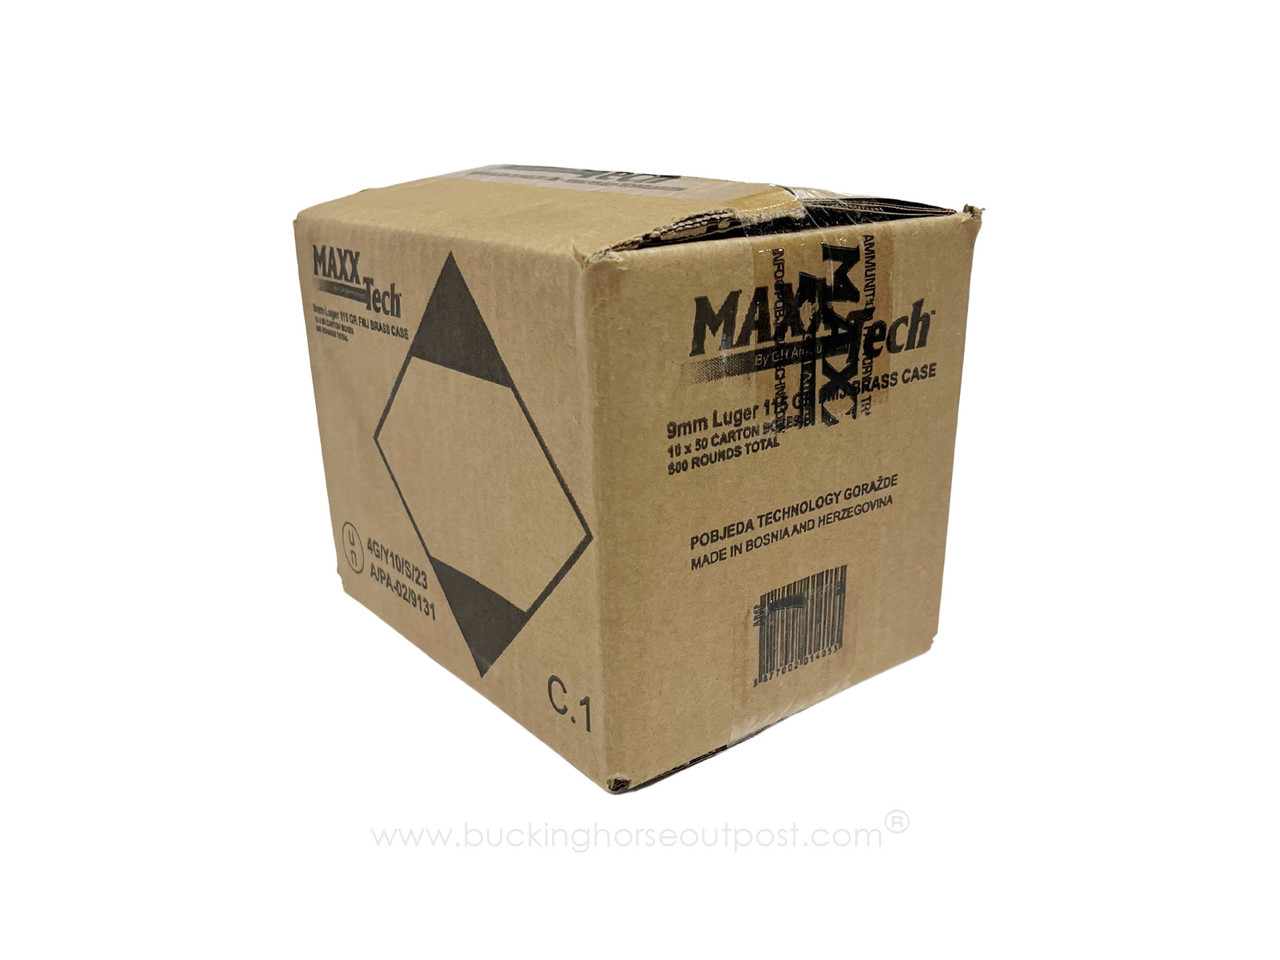 MaxxTech 9mm Luger 115 Grain Full Metal Jacket 500rds Per Case (PTGB9MMB) - FREE SHIPPING ON ORDERS OVER $175